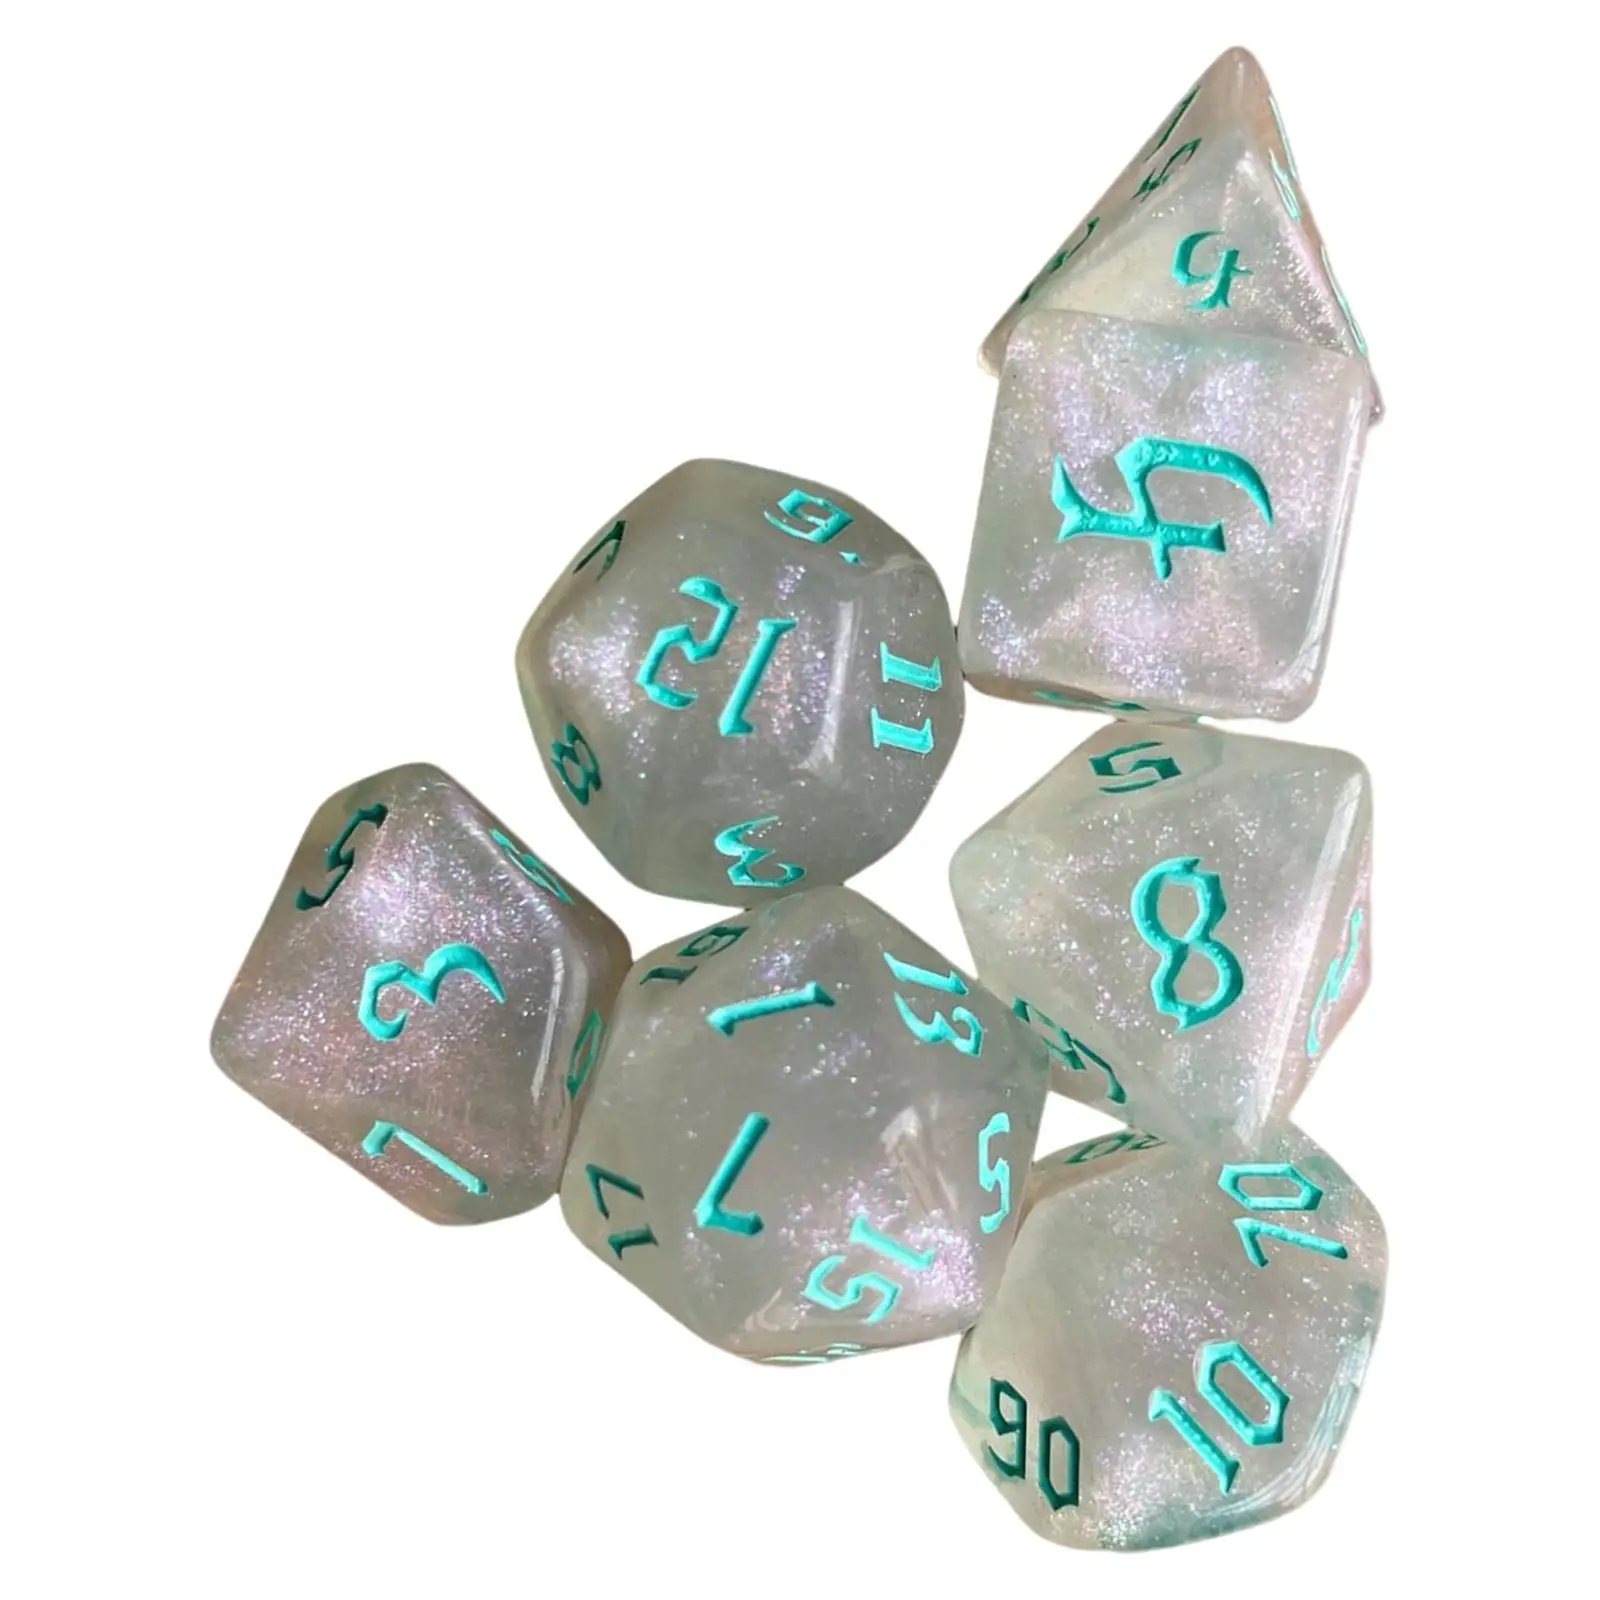 Polyhedral 7 Piece Gambling Dice for Parties Table Games Tabletop Games